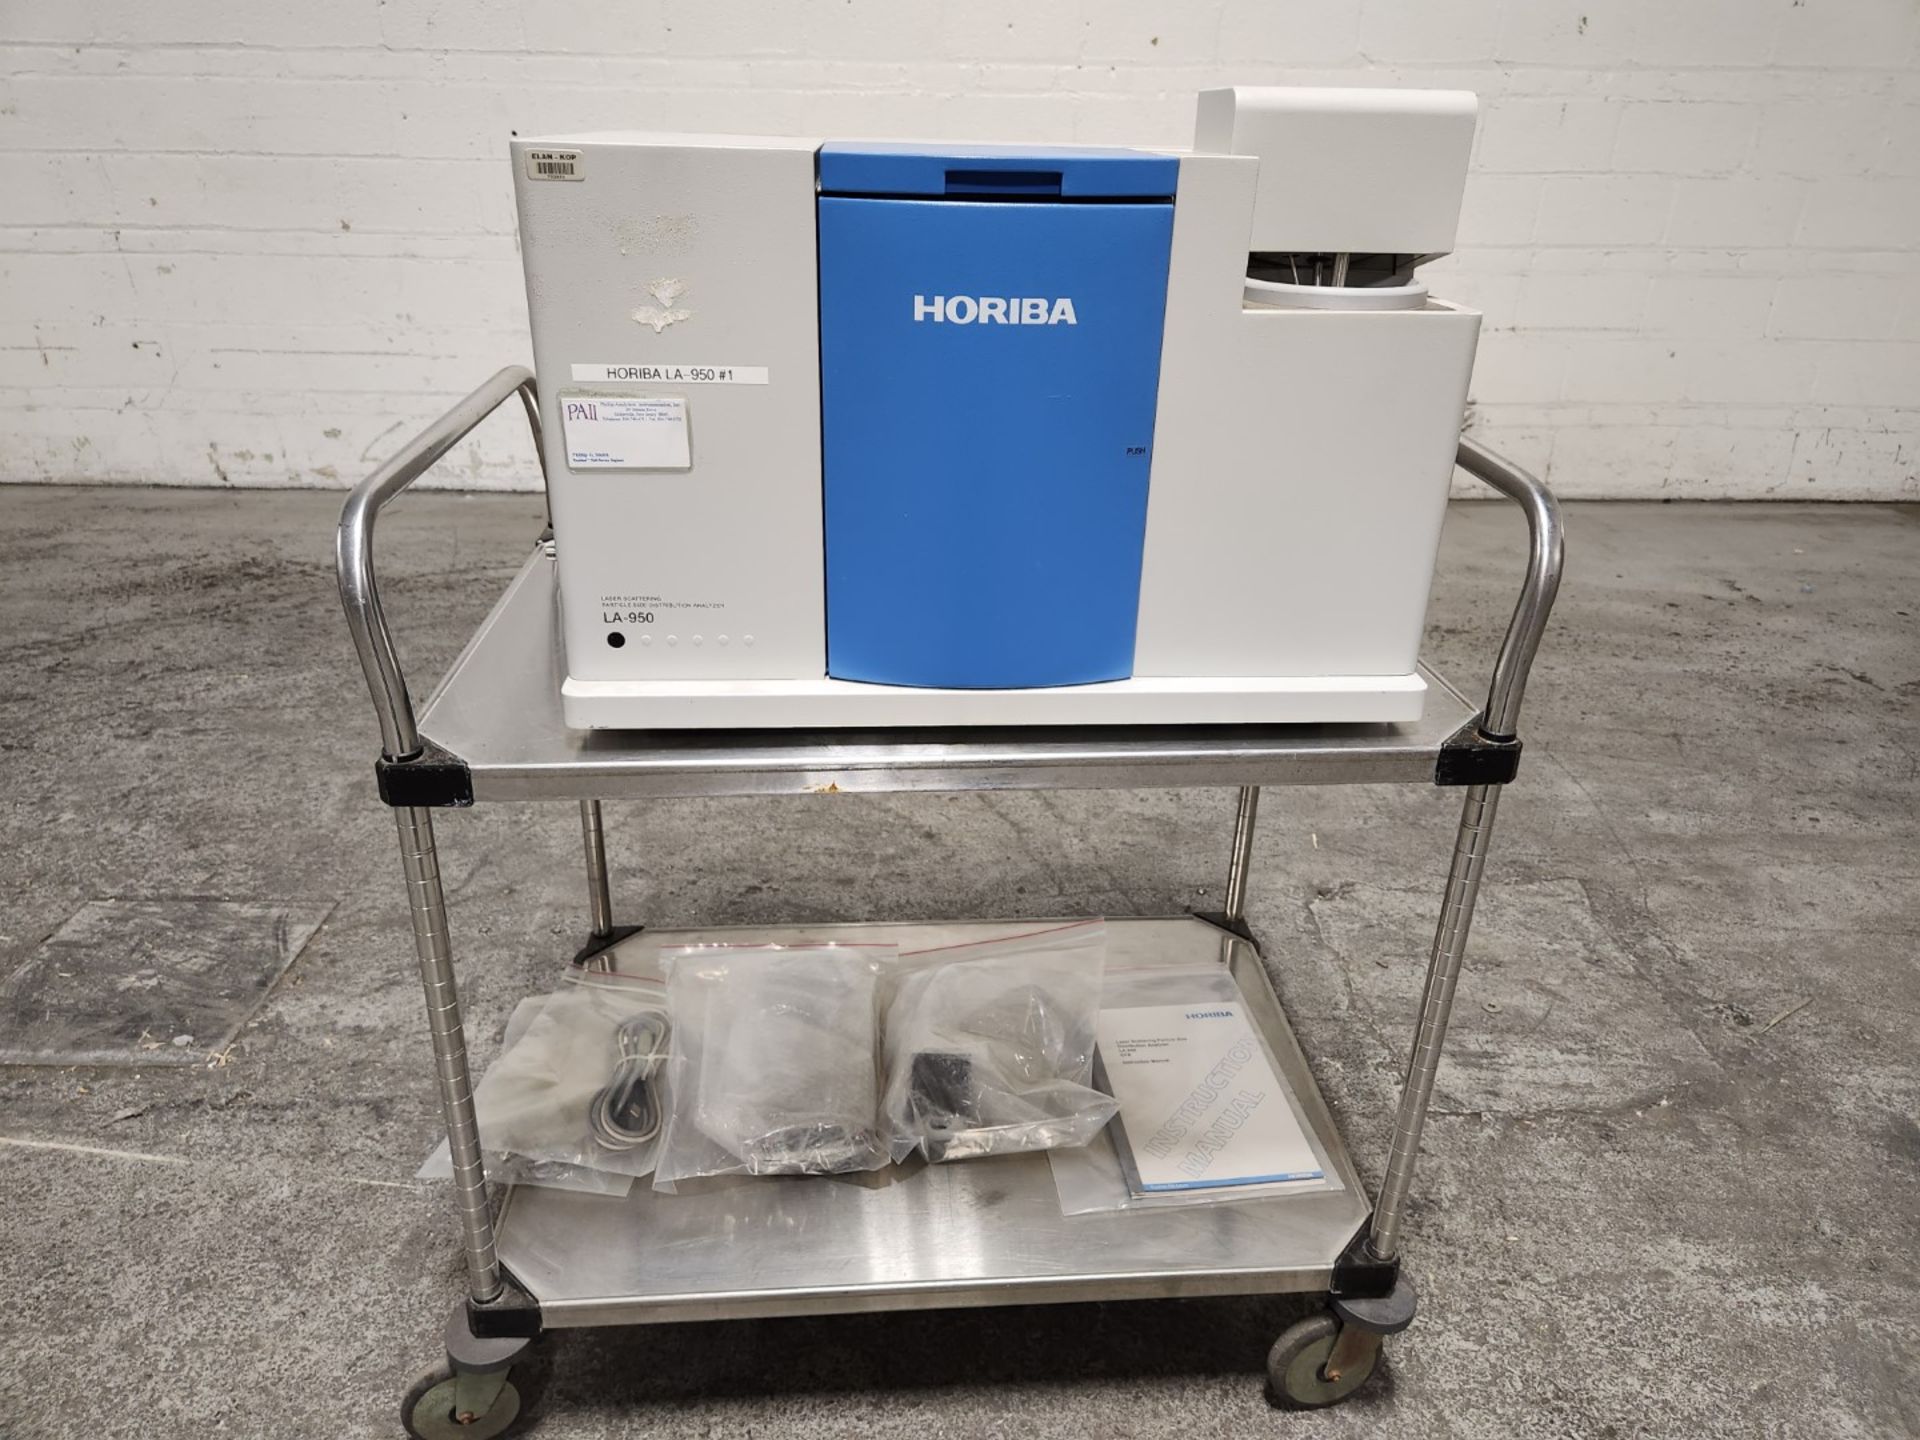 Horiba Partica Model LA-950 Laser Scattering Particle Size Distribution Analyzer, with manual and